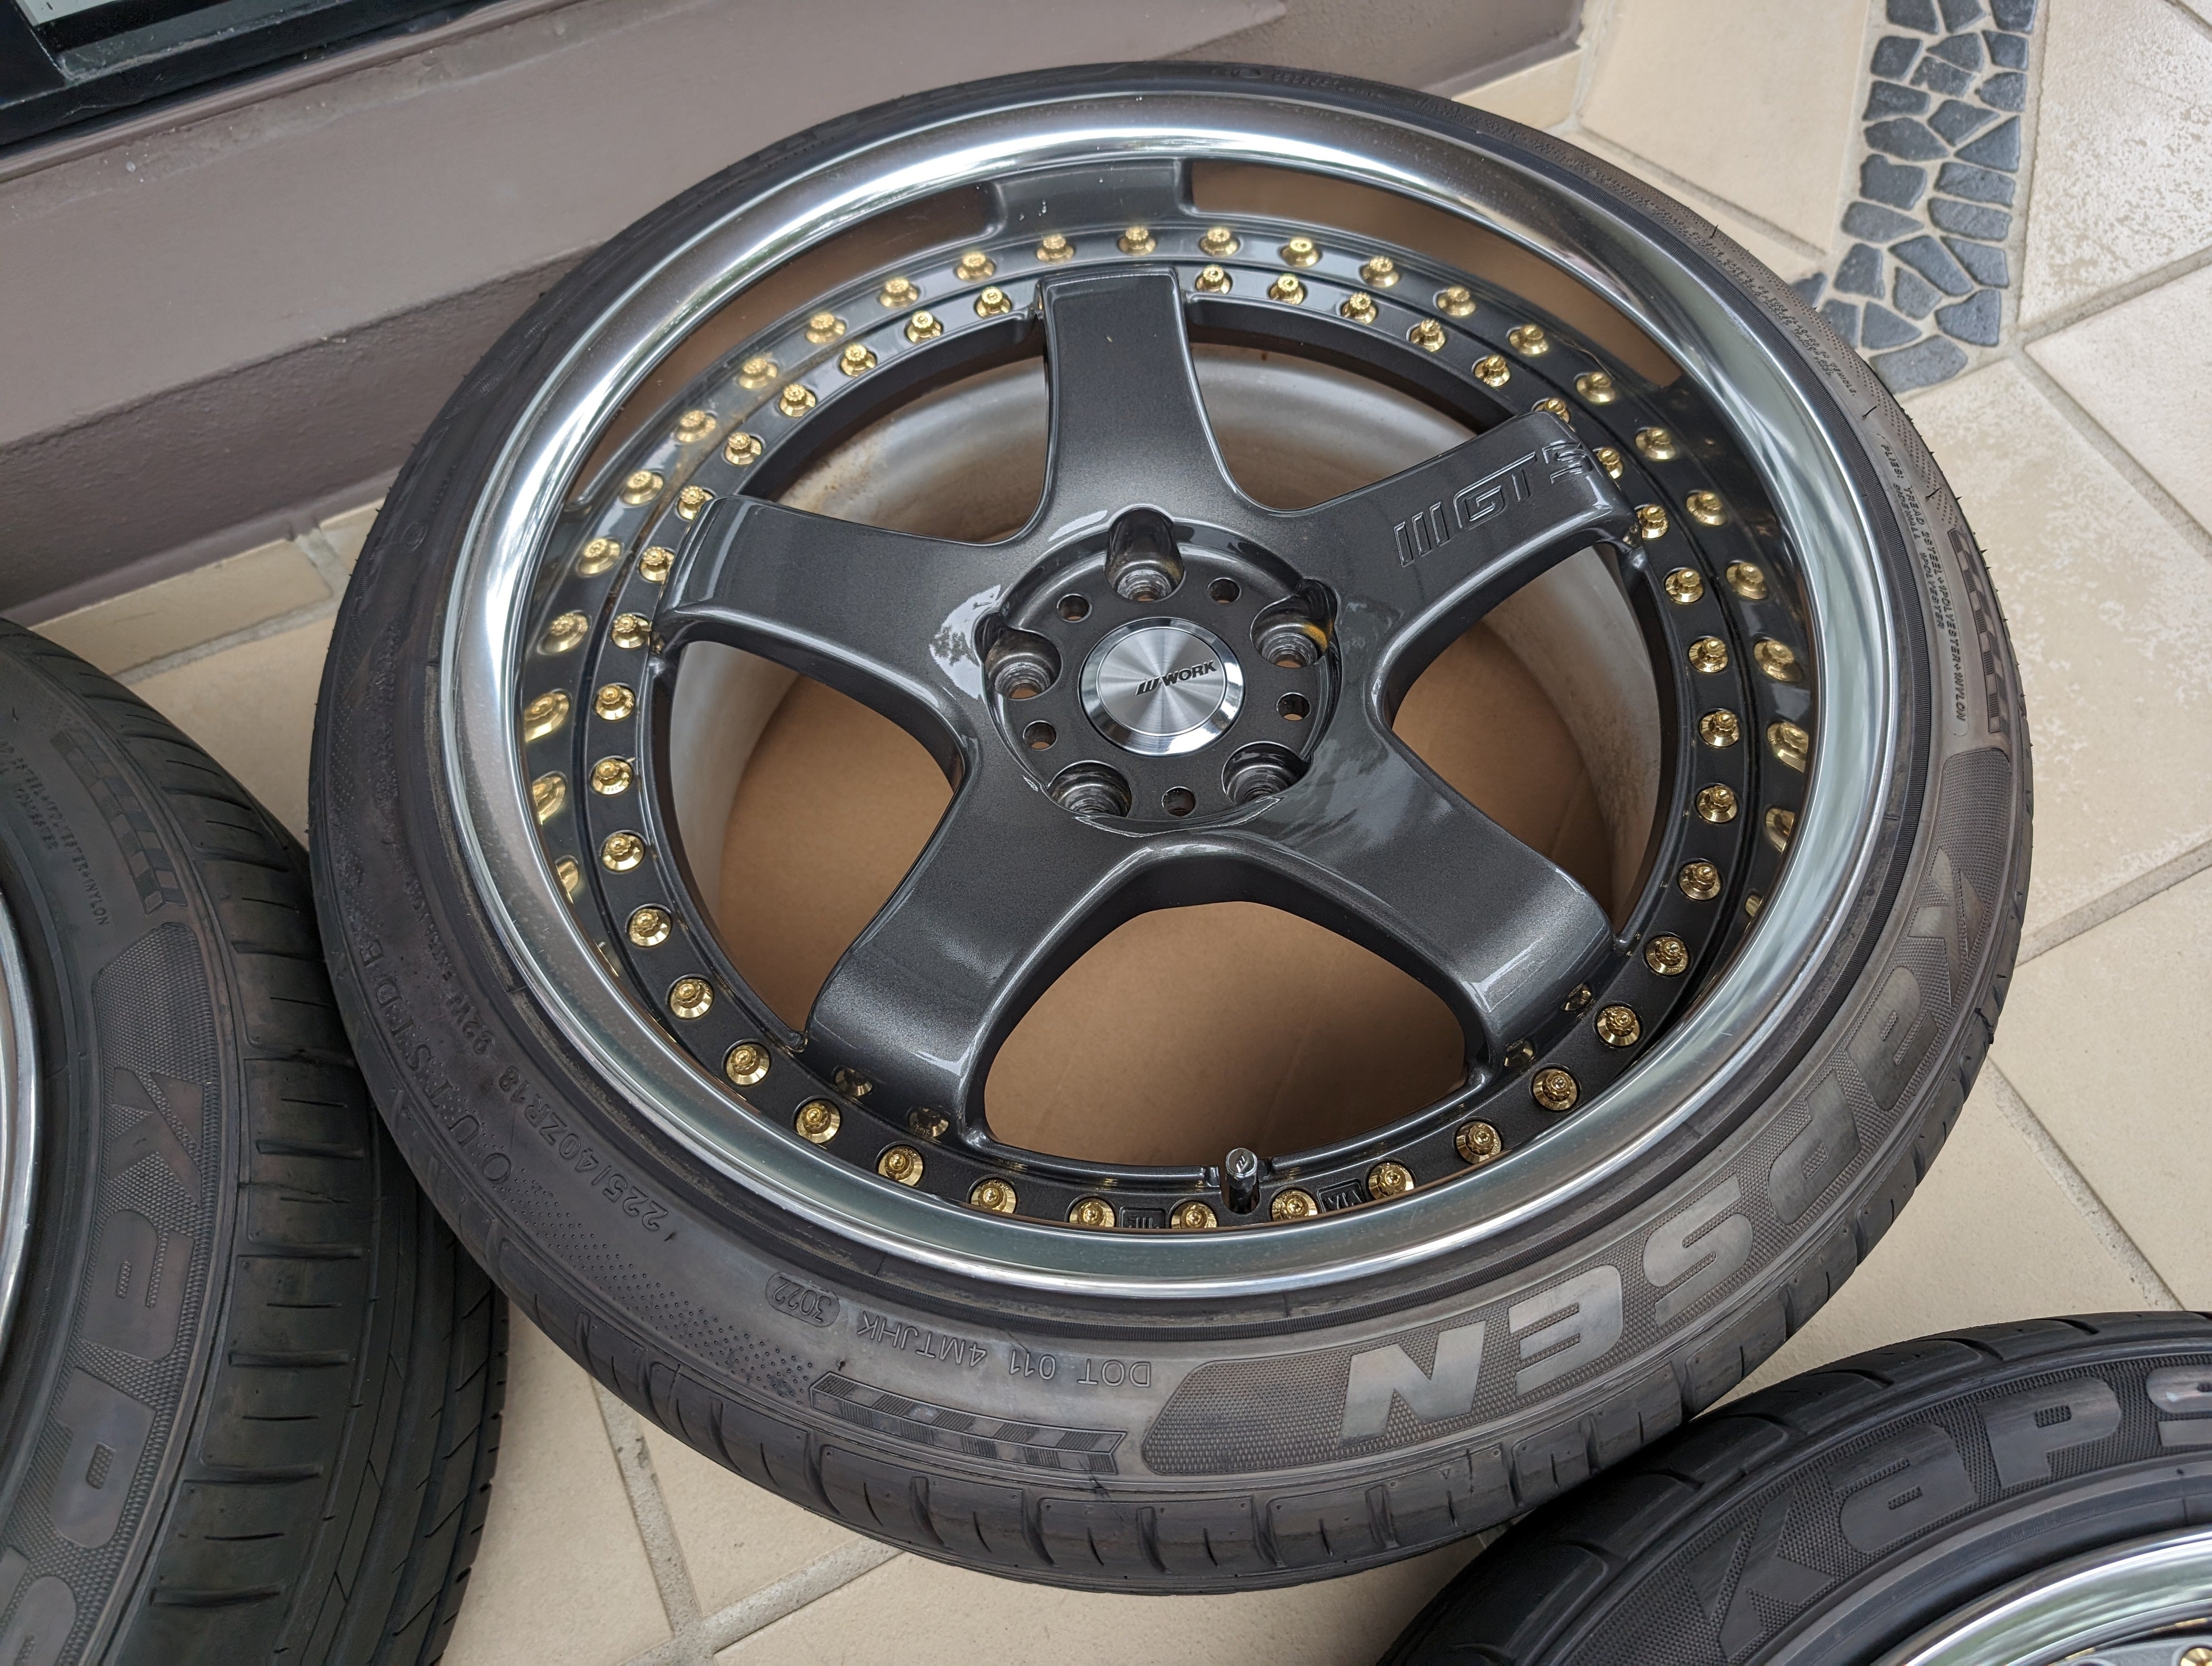 *Near New* Work Emotion GT5 3P With Genuine Work Centre Caps with Tyres - PCD 5x114.3 - F: 18x9.5 +18 (A-Disk) - R: 18x9.5 +25 (O-Disk)